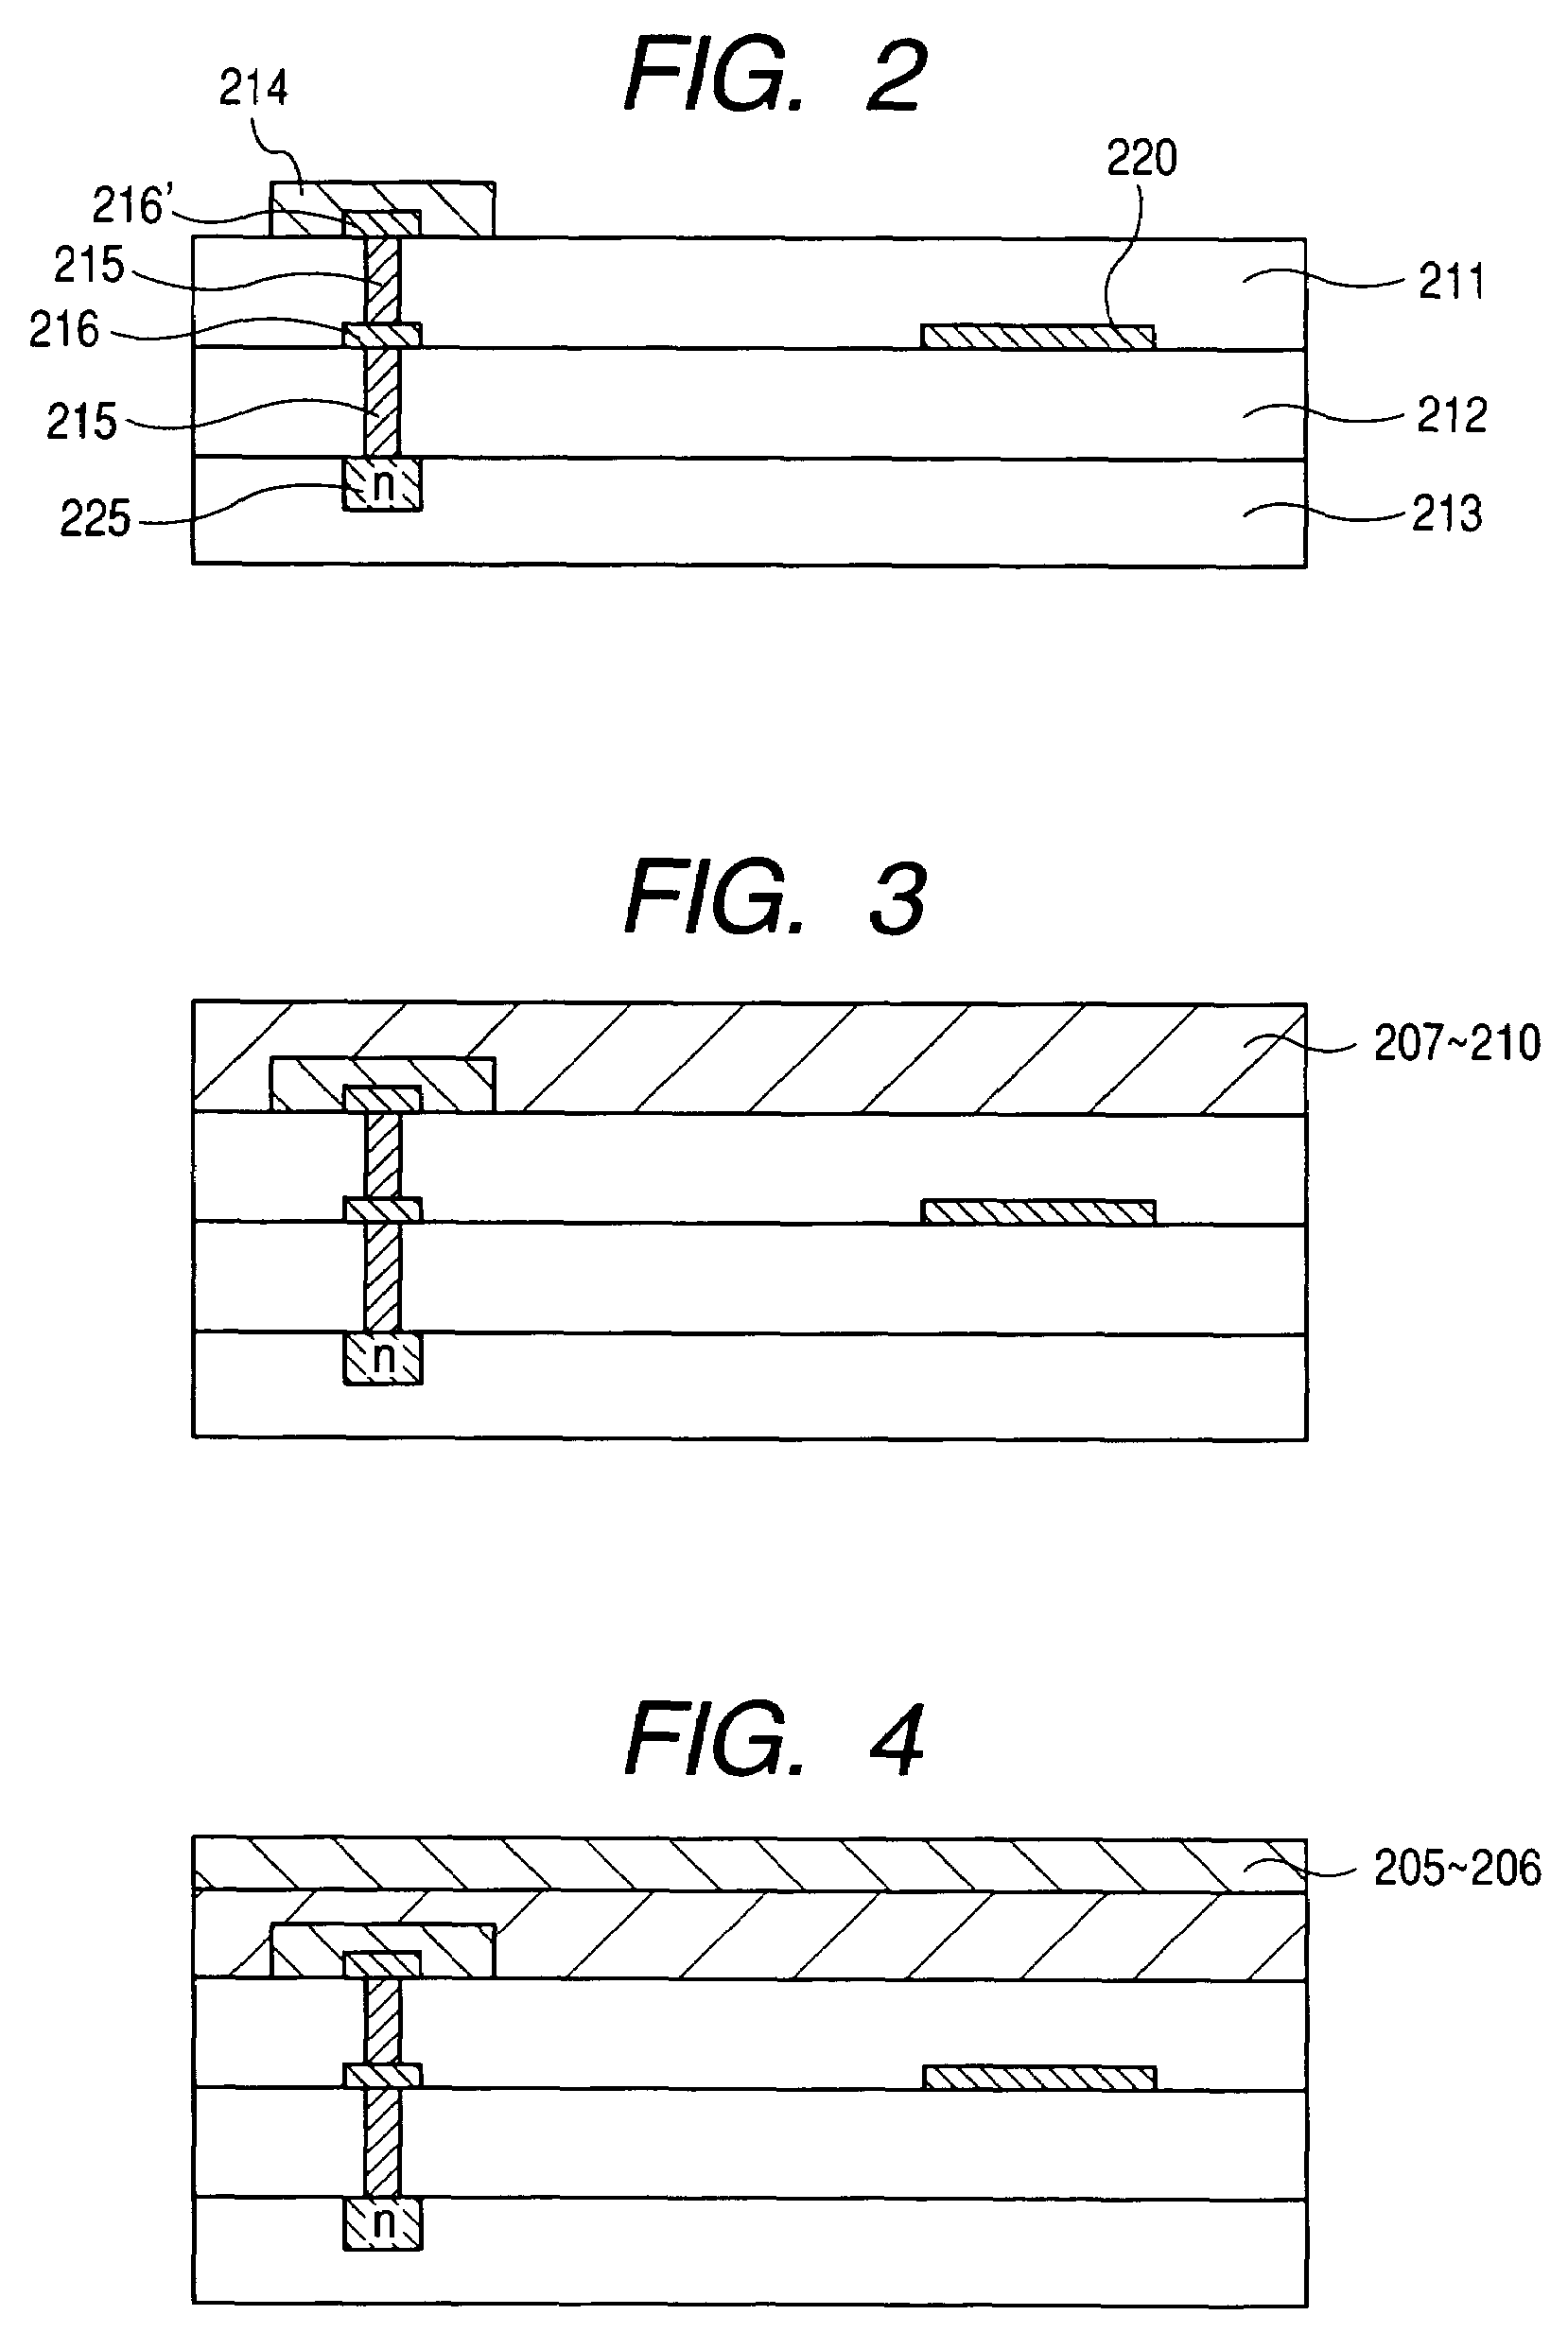 Functional layer having wiring connected to electrode and barrier metal between electrode and wiring